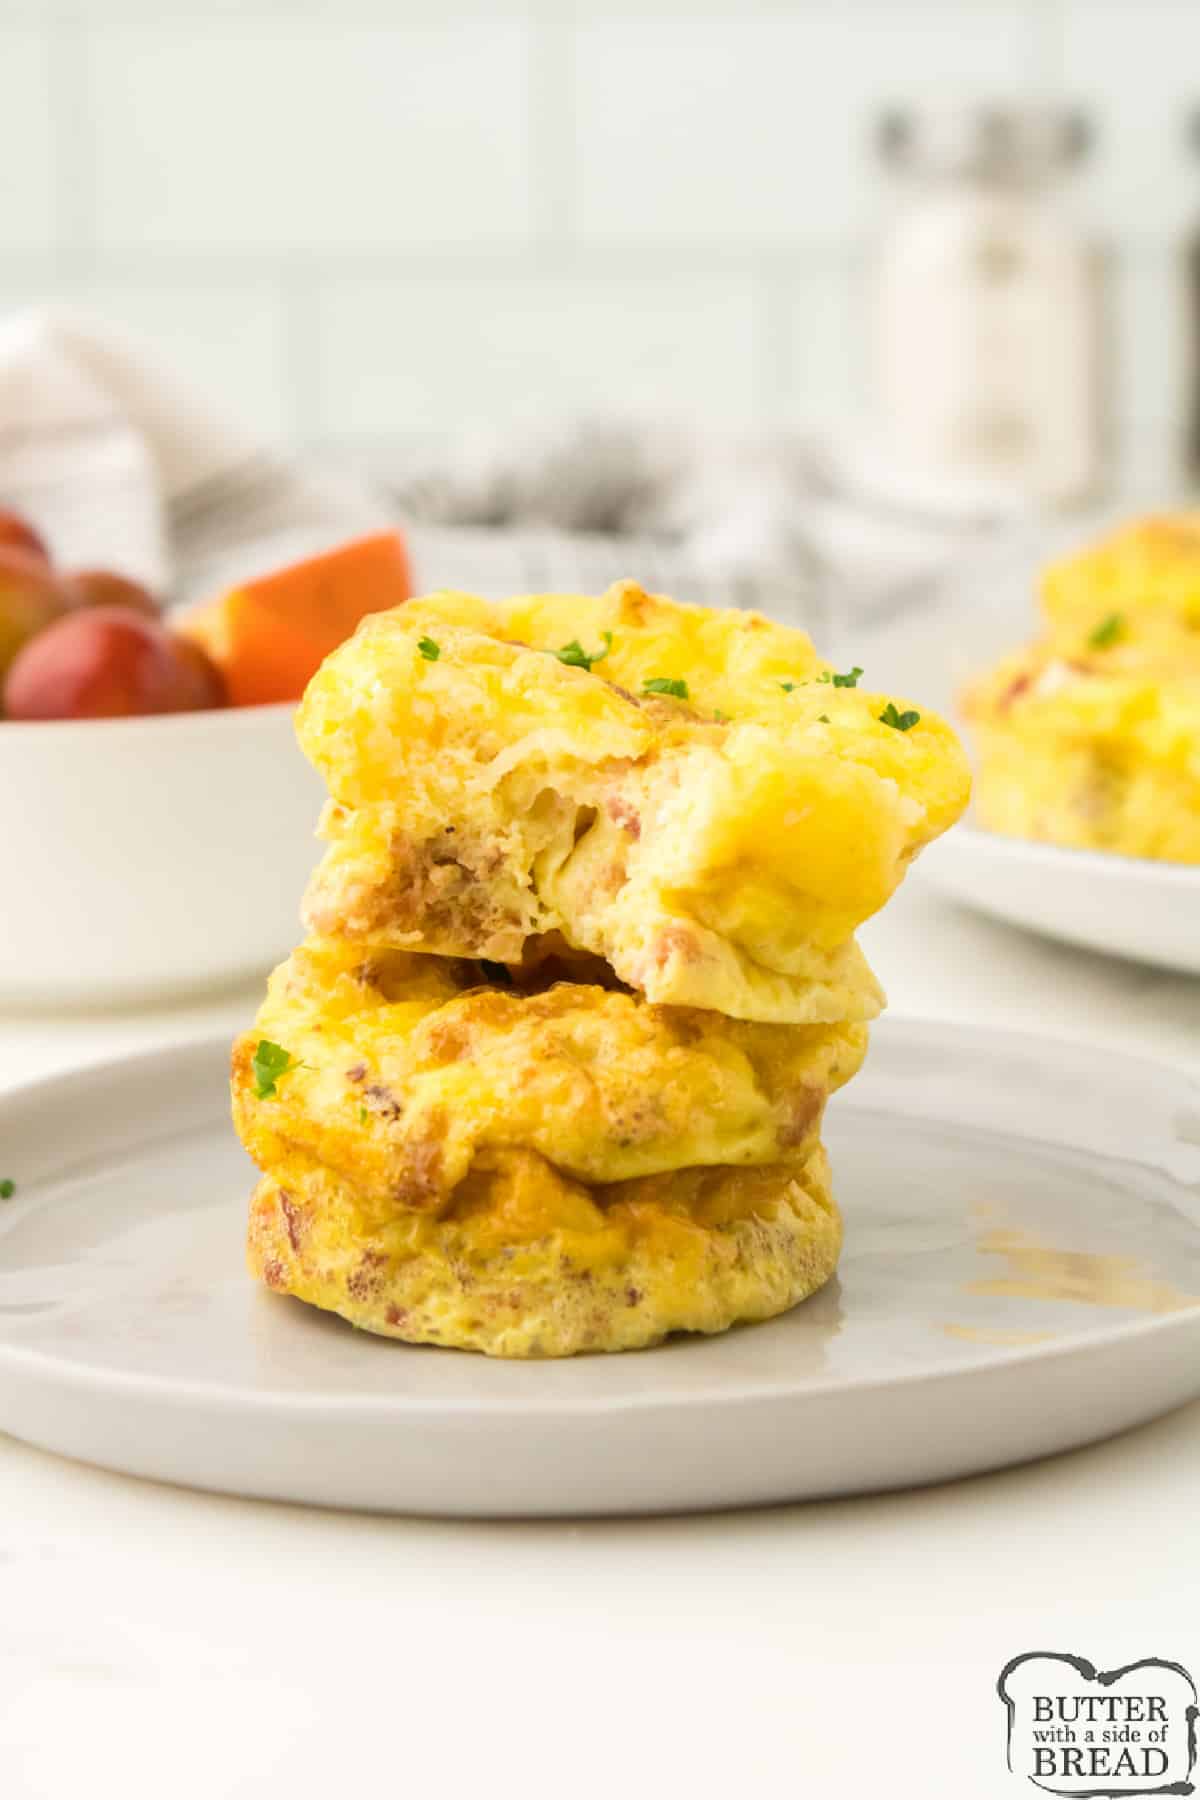 Egg bite recipe with eggs, bacon and cheese